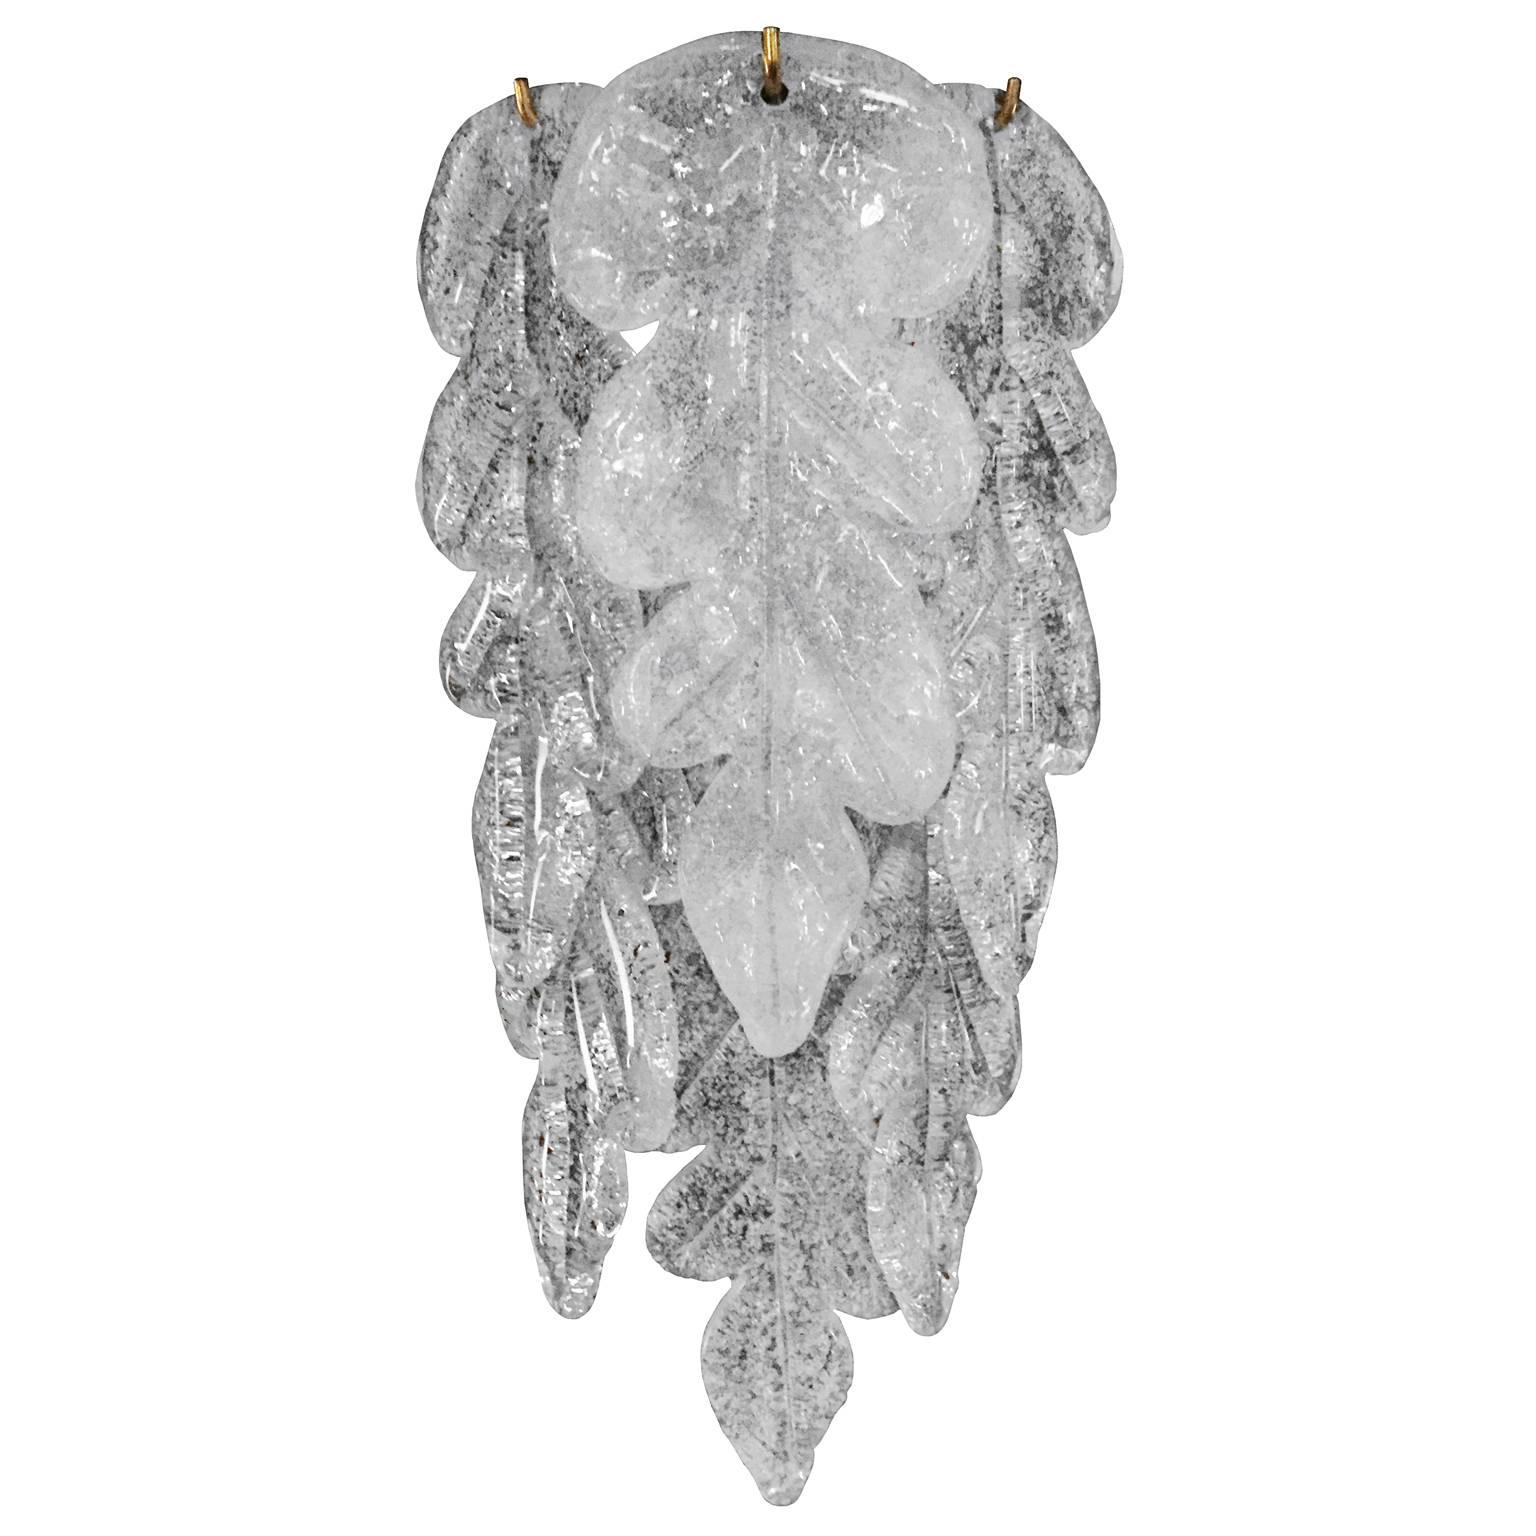 Pair of Cascading Murano Glass Leaf Wall Sconces